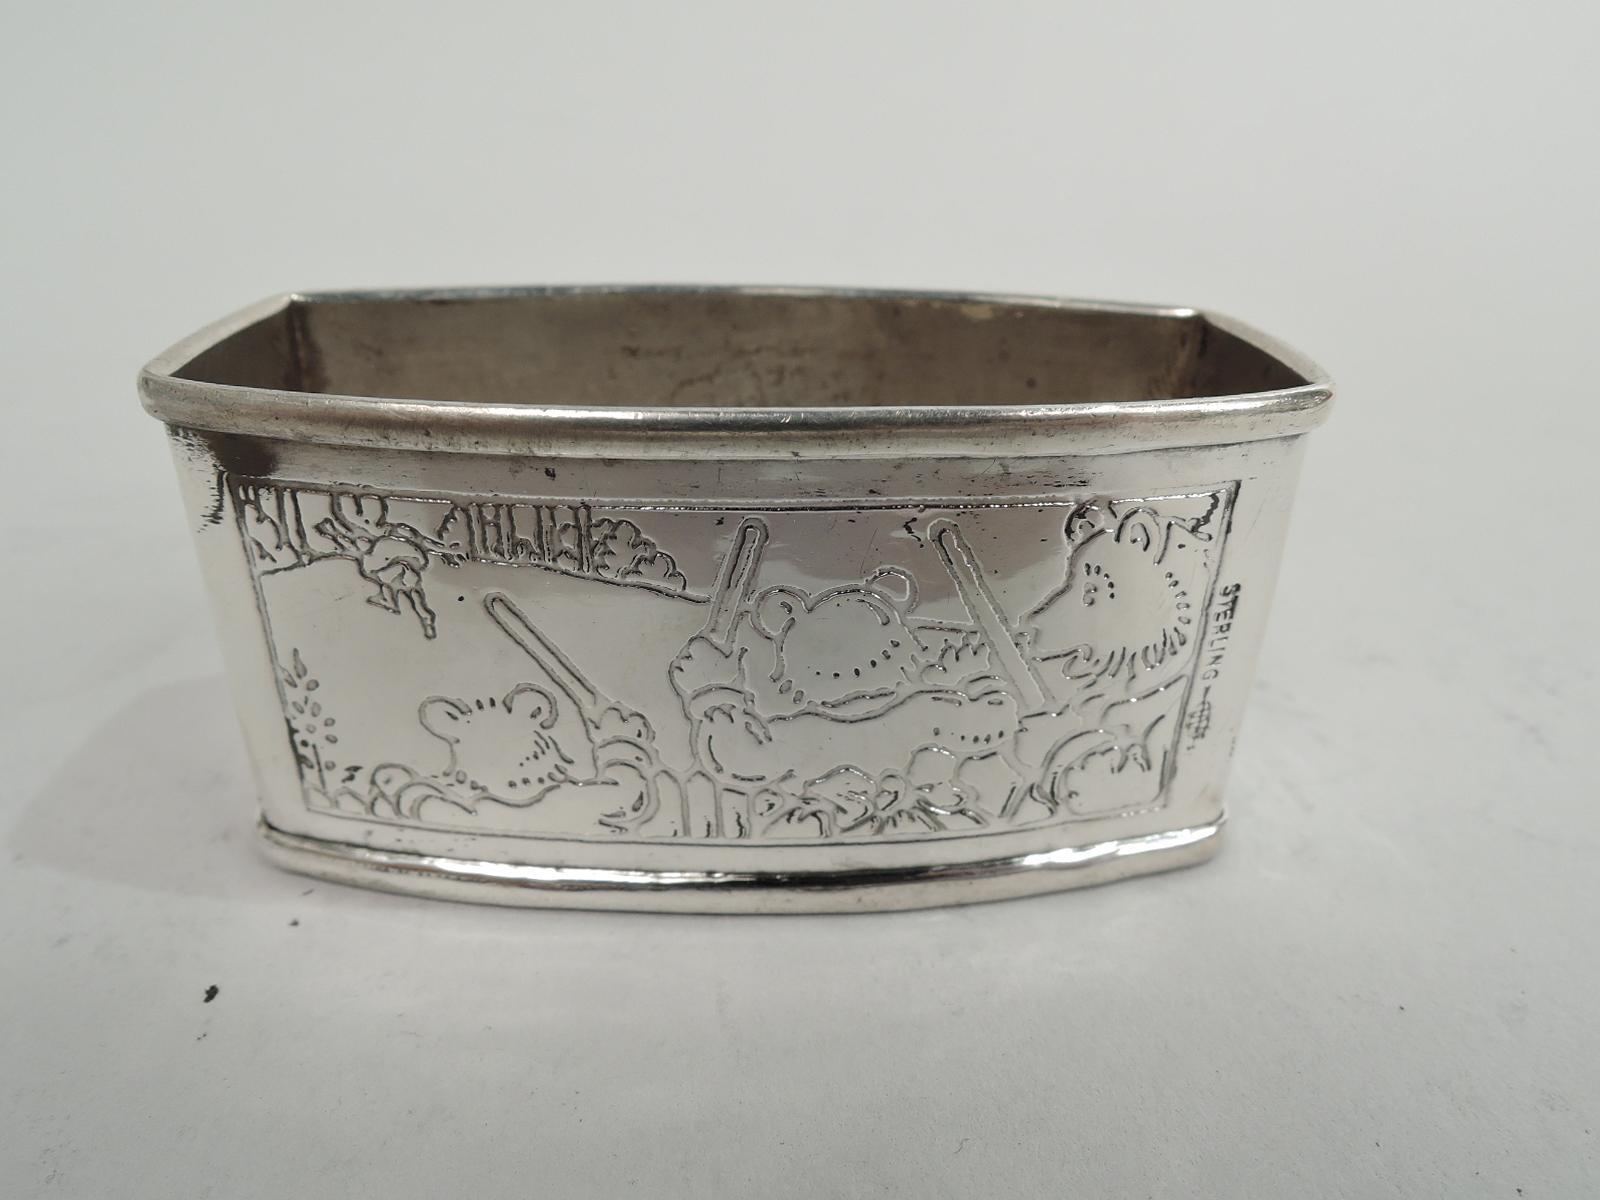 Edwardian sterling silver napkin ring. Made by Webster in North Attleboro, Mass., ca 1910. Curved front and back and flat ends. Acid-etched scenes from Goldilocks and the Three Bears: On front Mama Bear and Papa Bear inspect the porridge bowls while